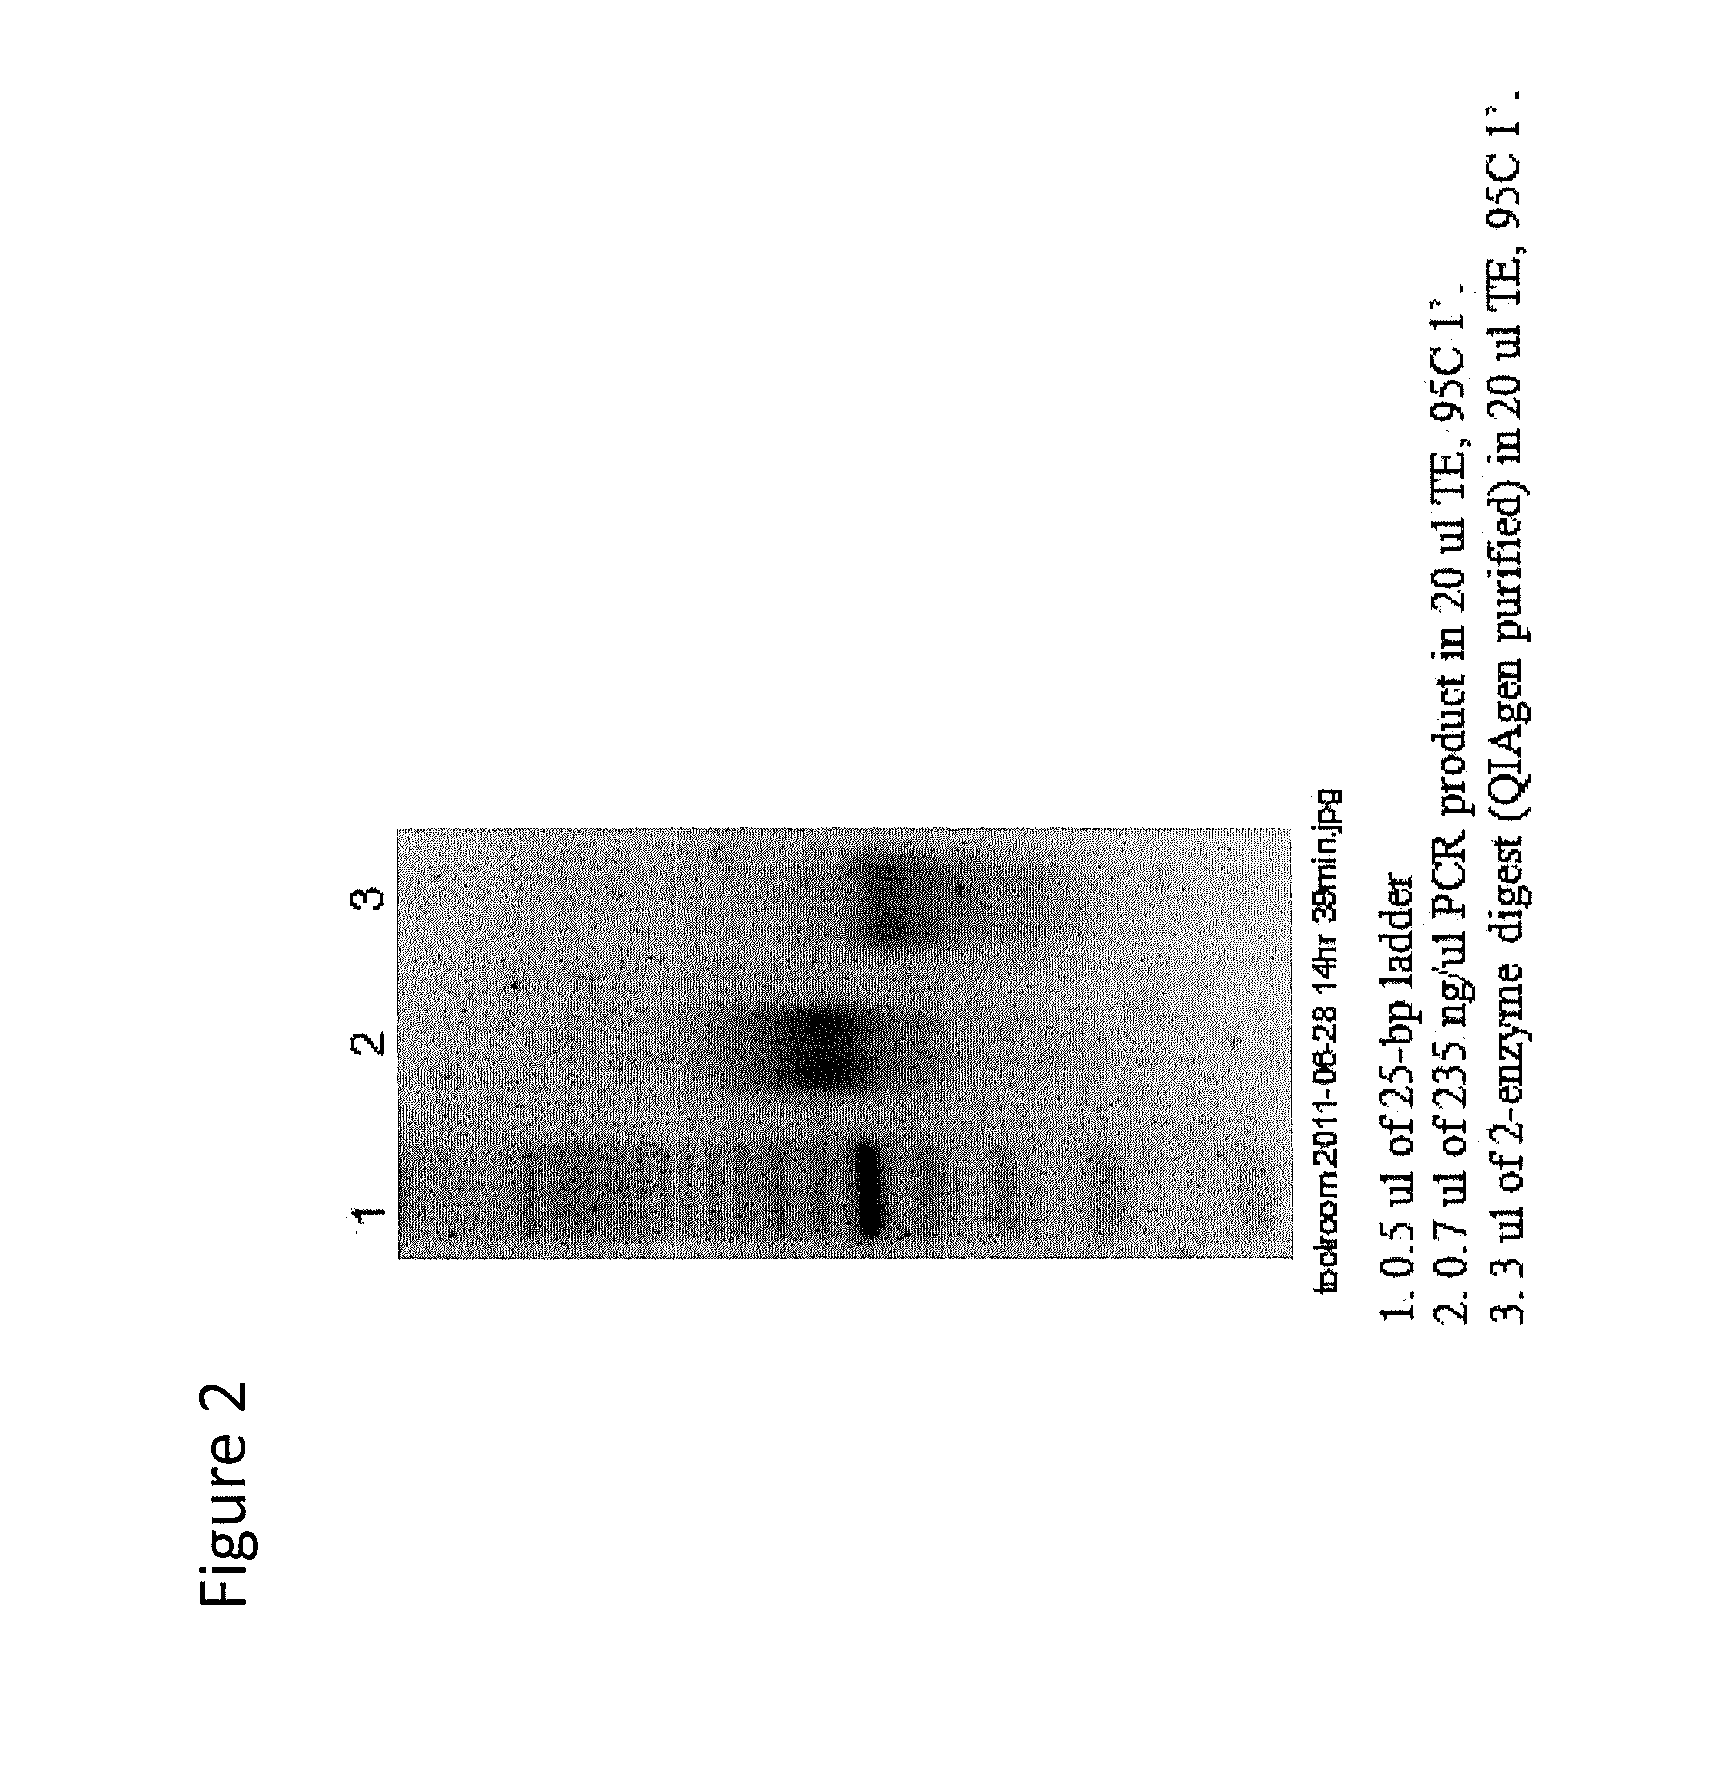 Sequence capture method using specialized capture probes (heatseq)